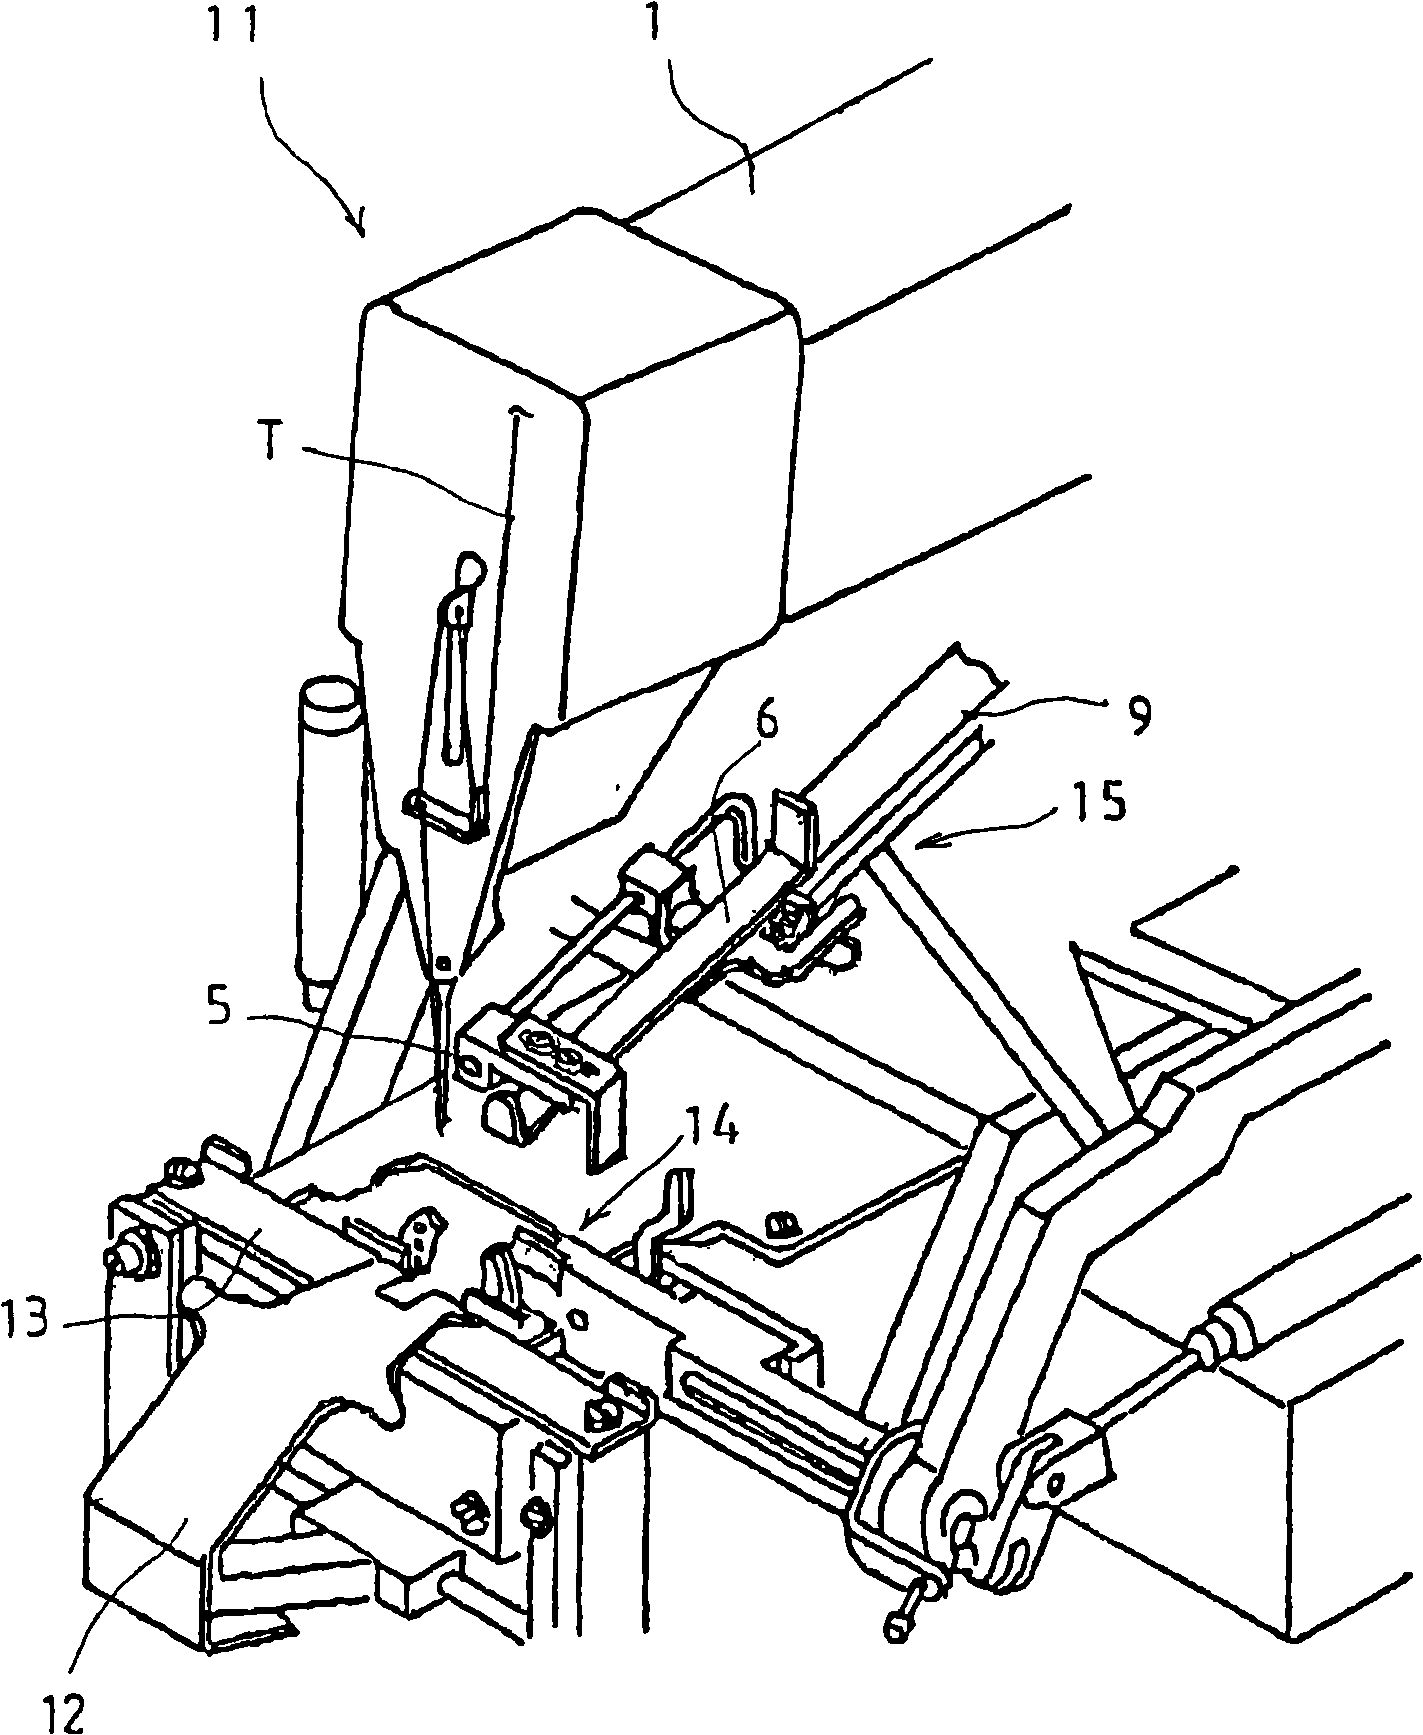 Thread hooking apparatus of button-sewing machine